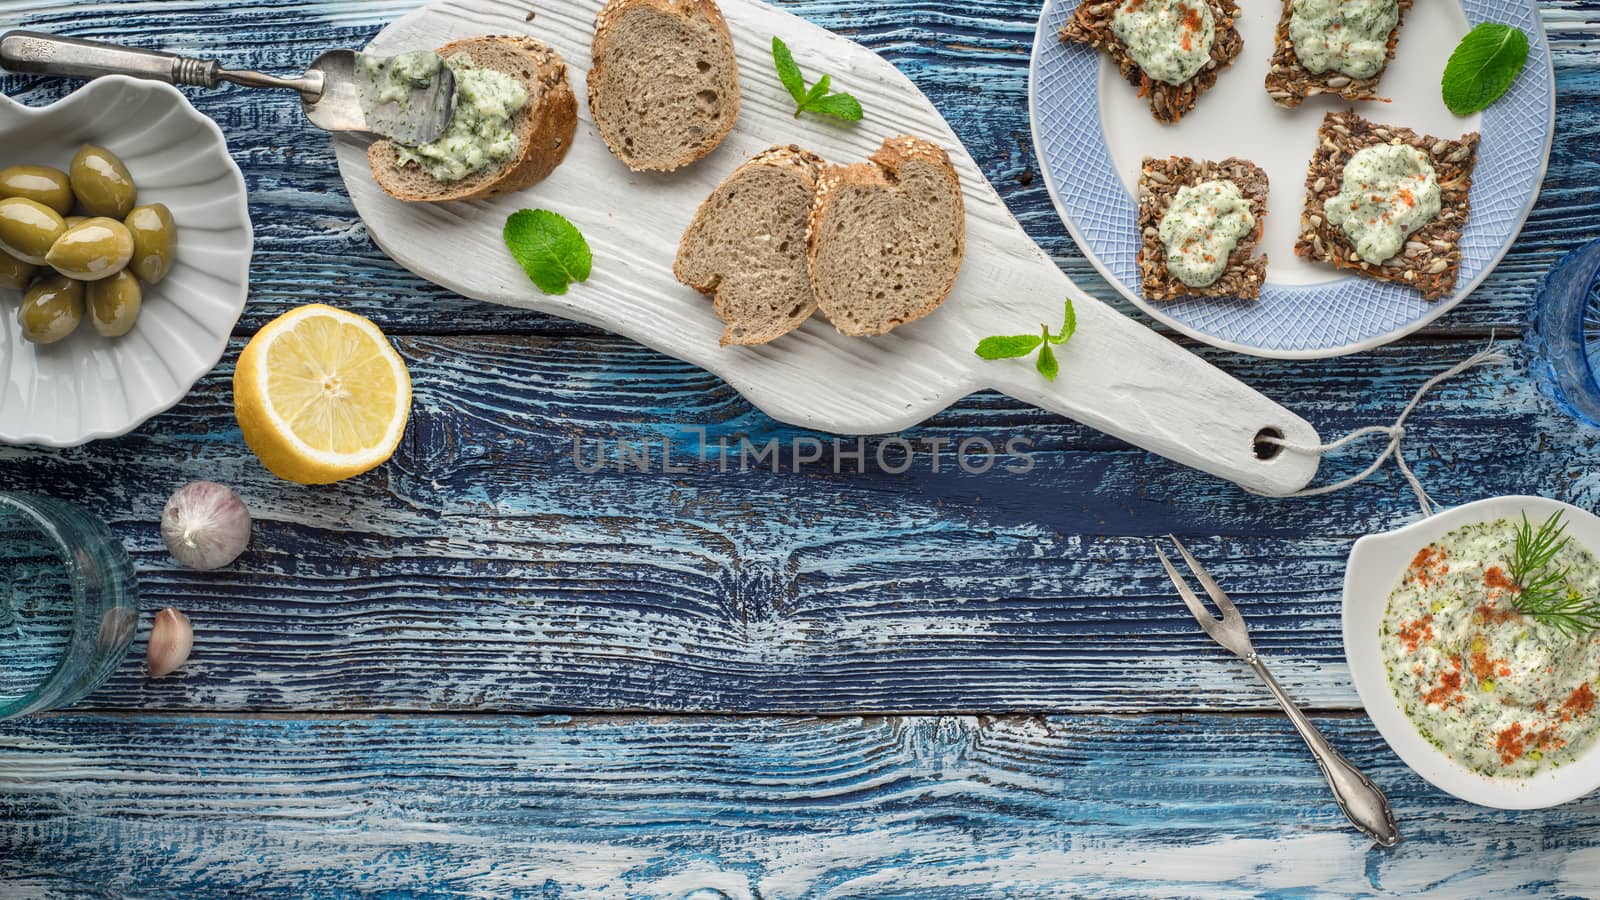 Bread with tzatziki on the blue wooden table with accessorize horizontal